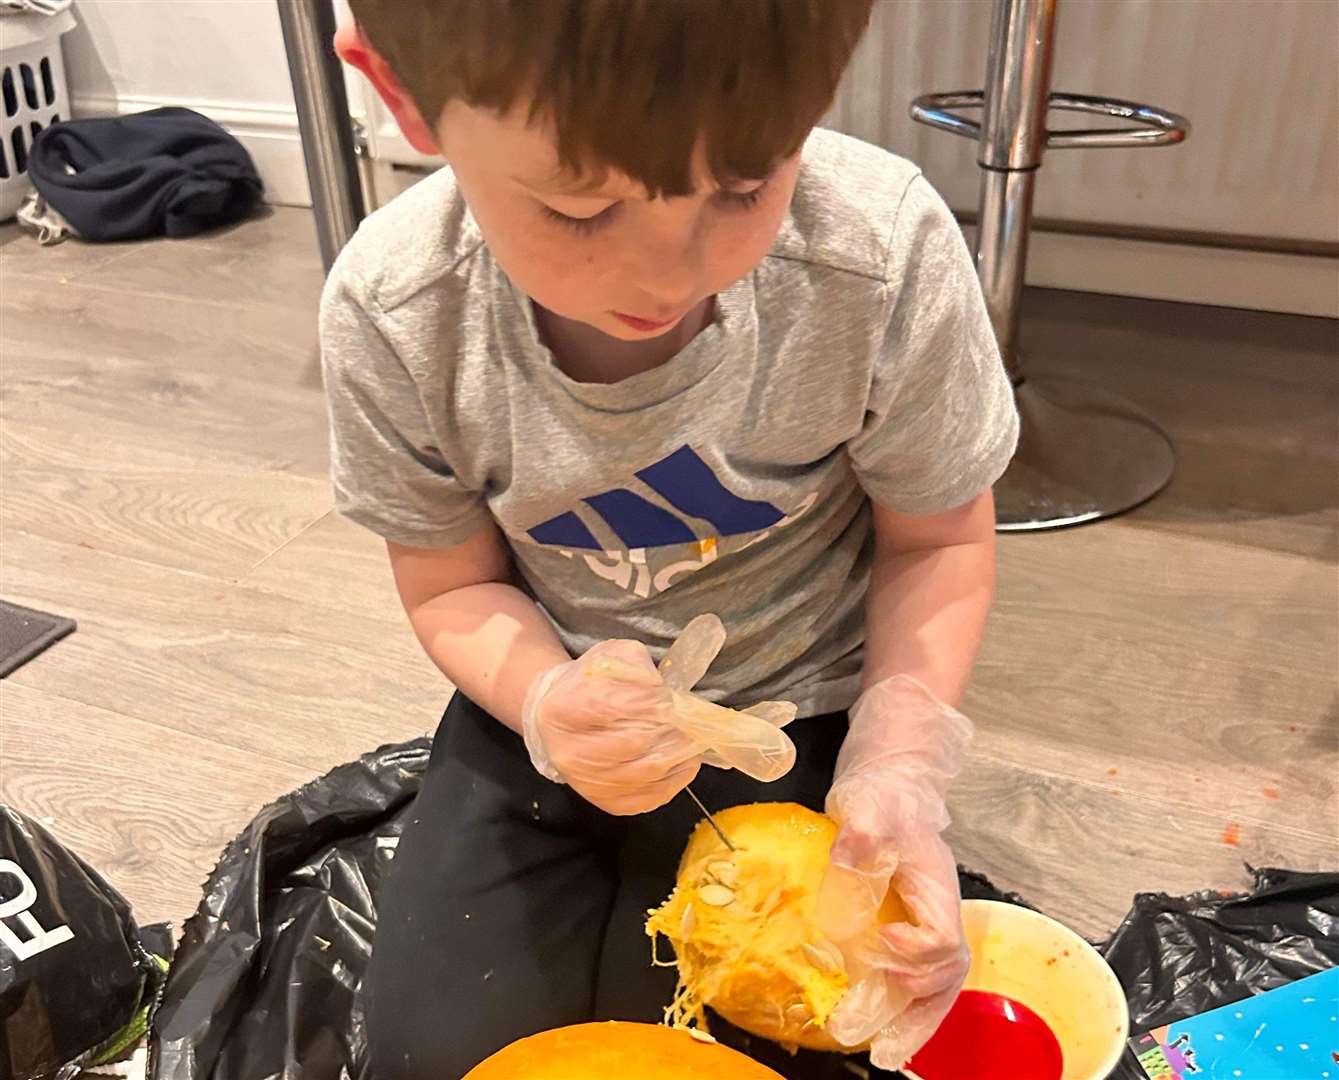 It was his first time carving his own pumpkin